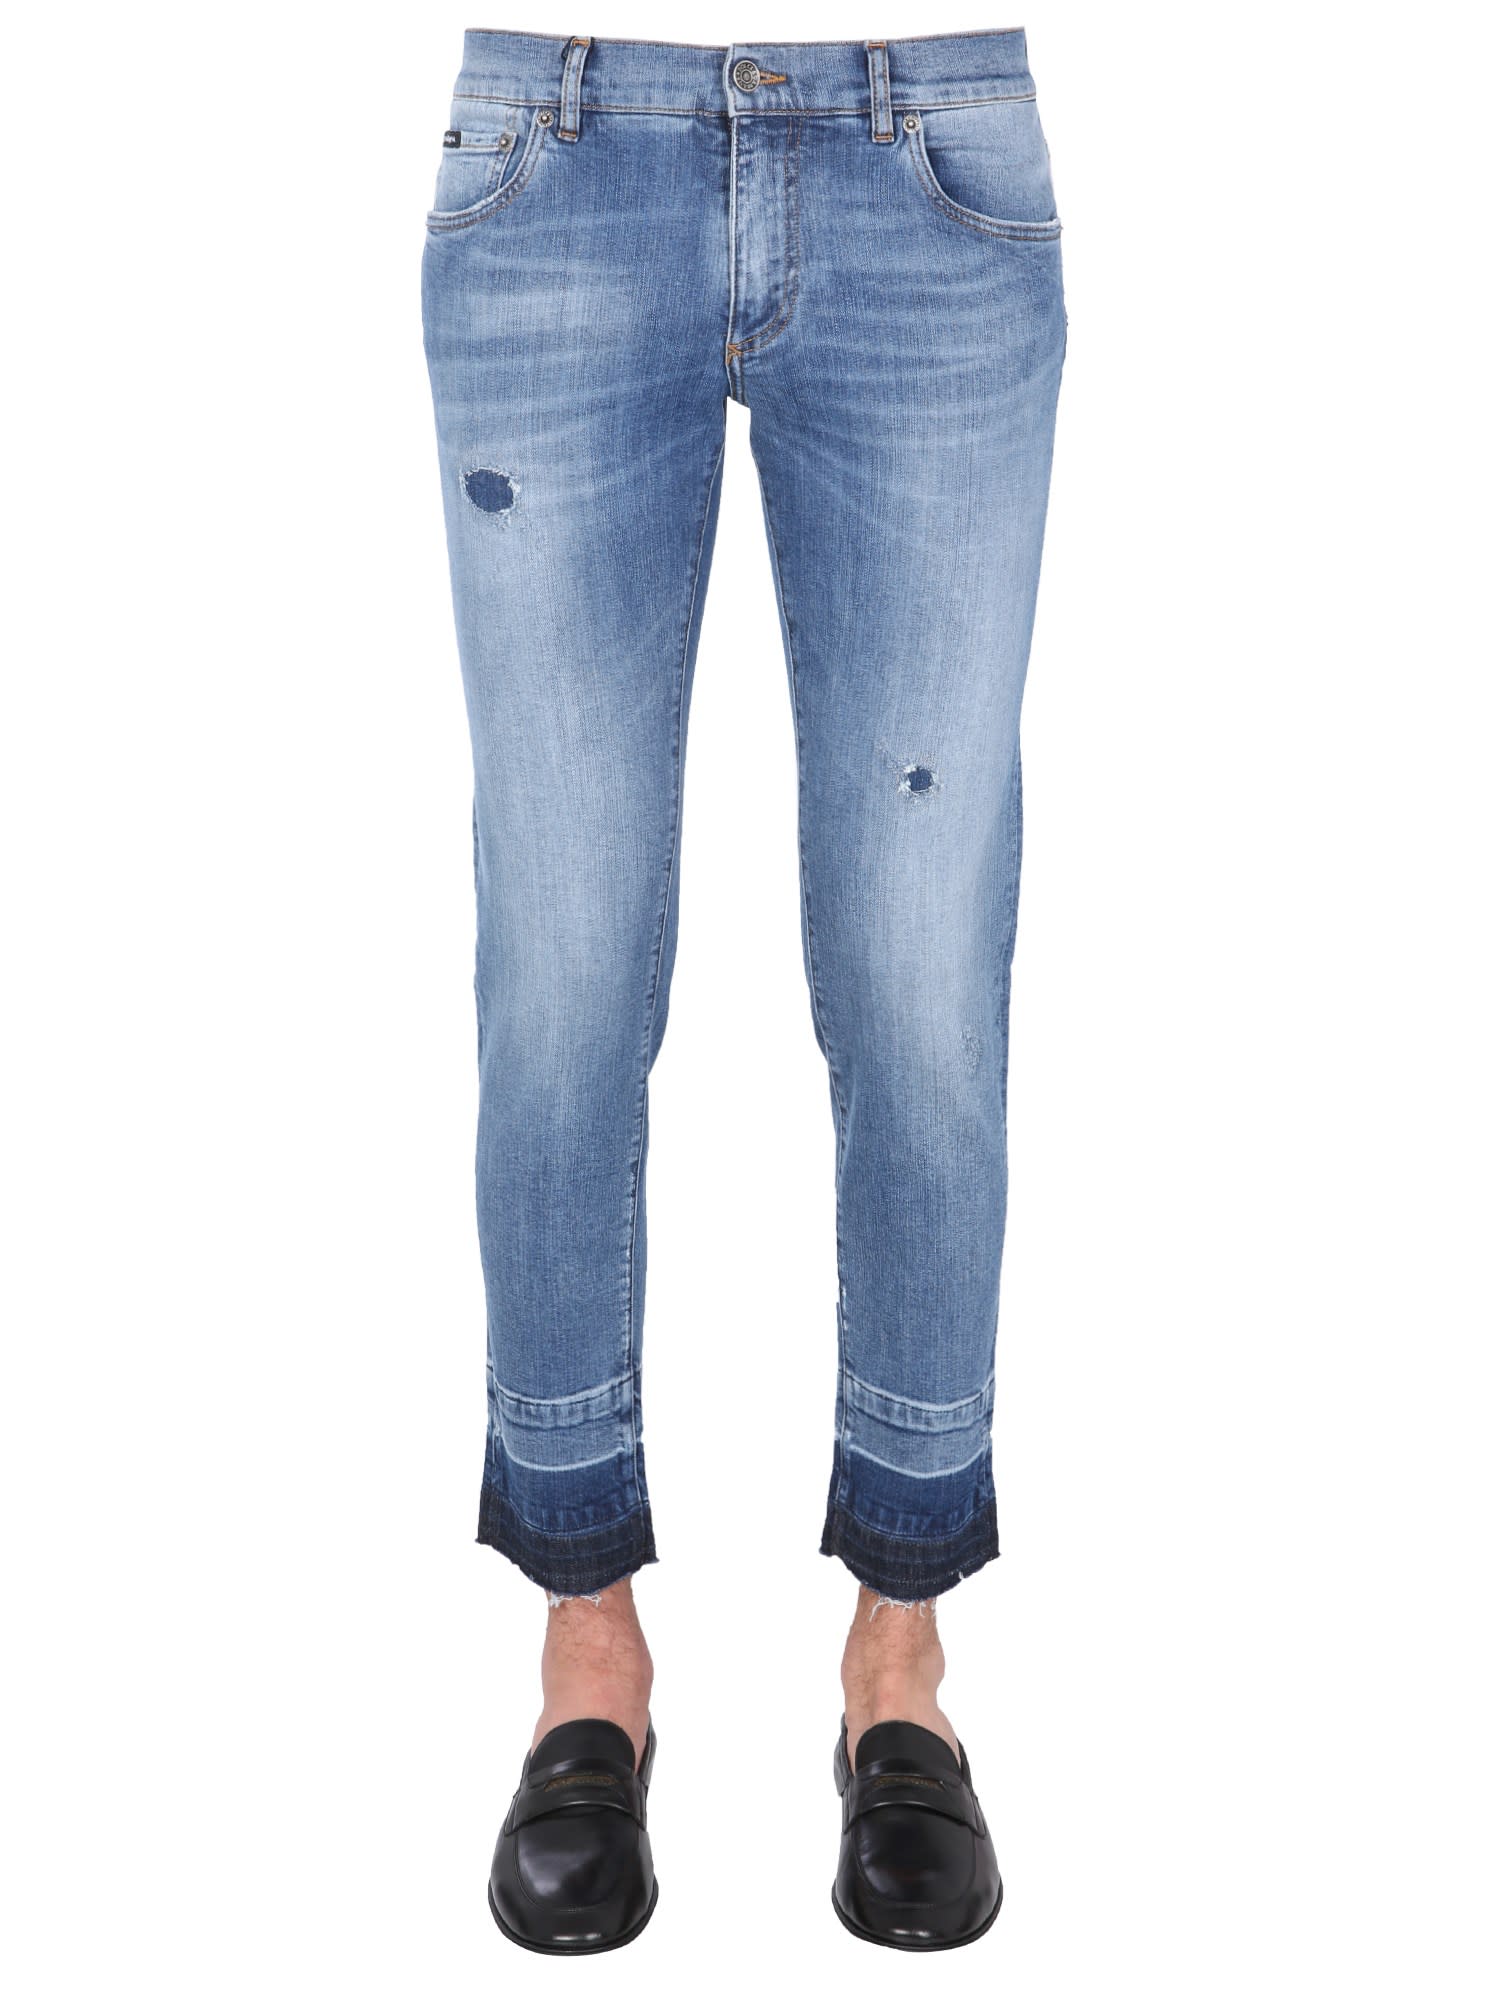 DOLCE & GABBANA SKINNY FIT JEANS,GYC4LD G8EE0S9001